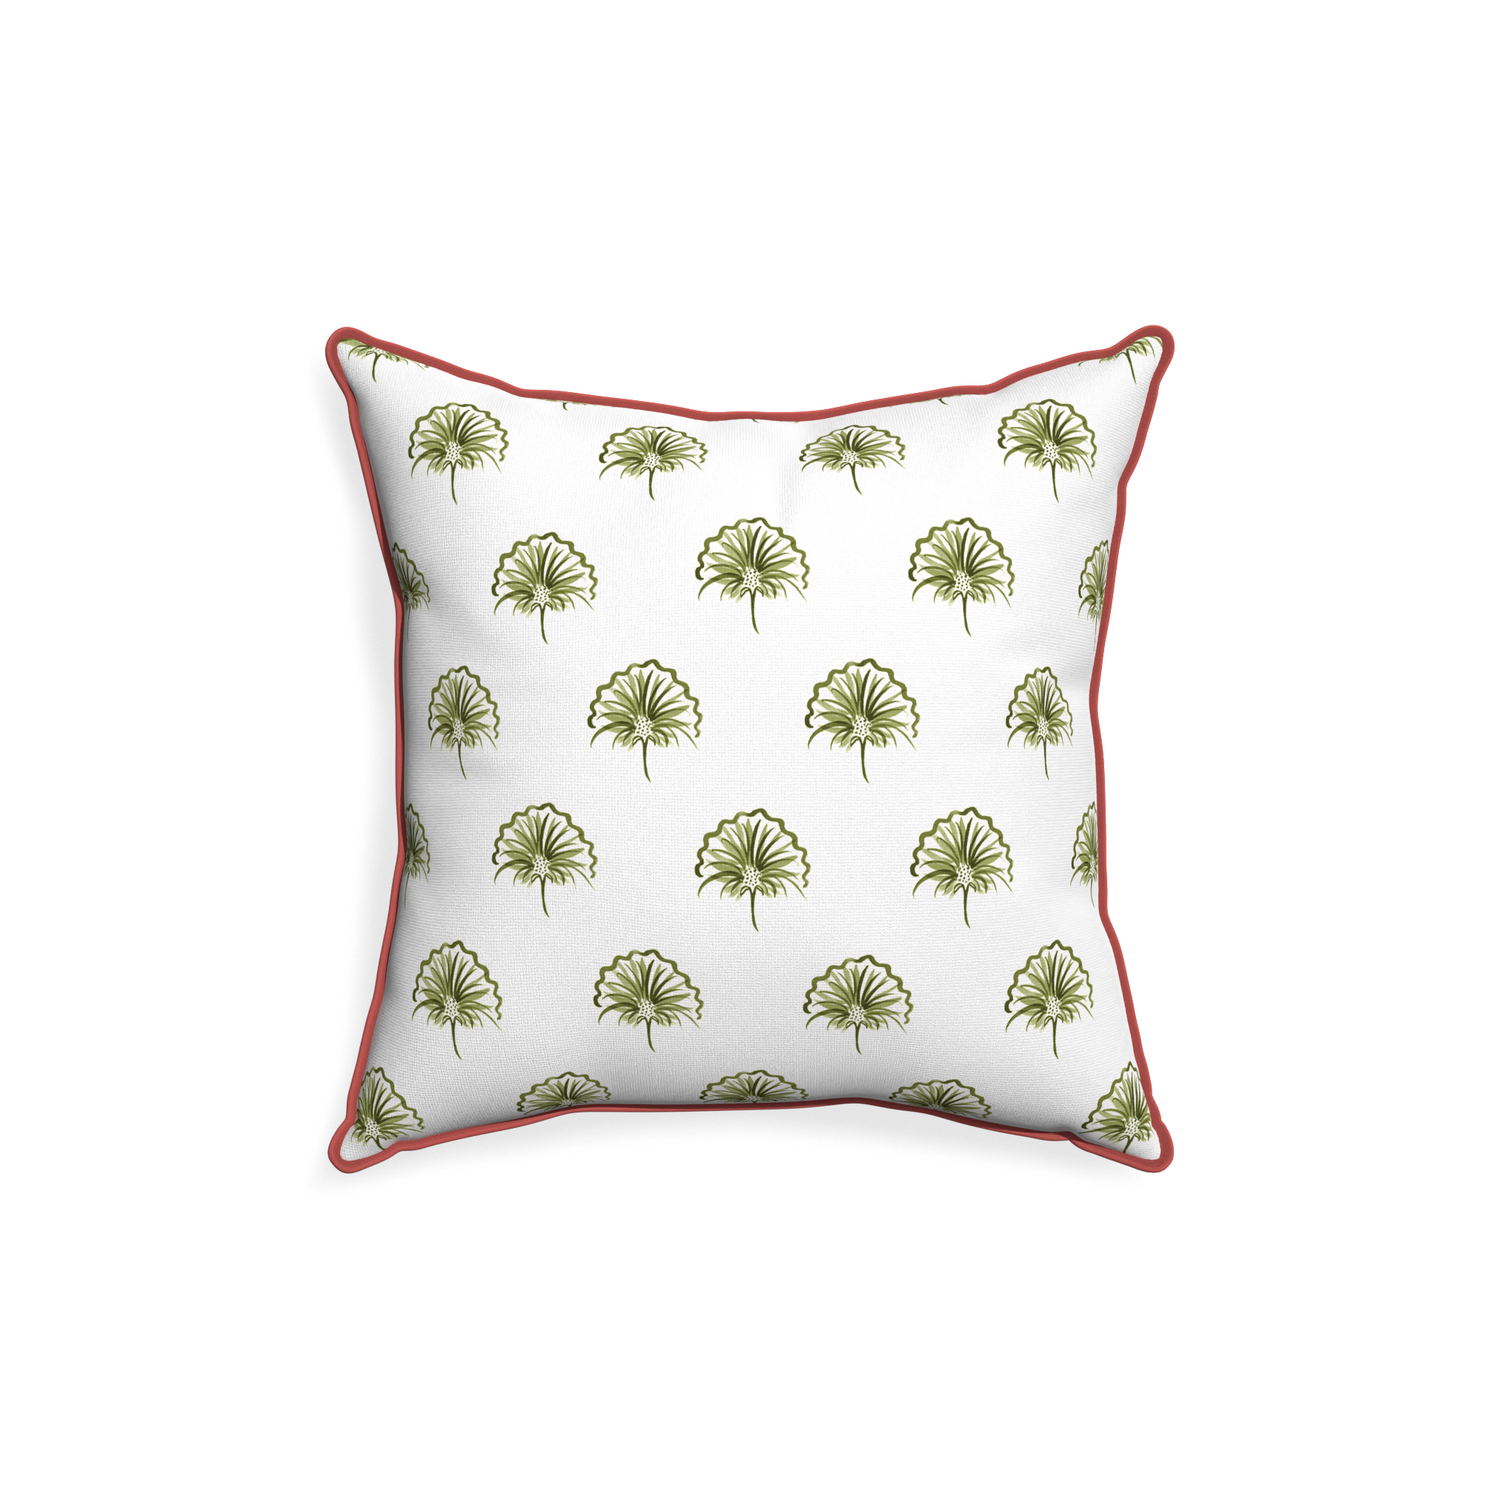 18-square penelope moss custom pillow with c piping on white background